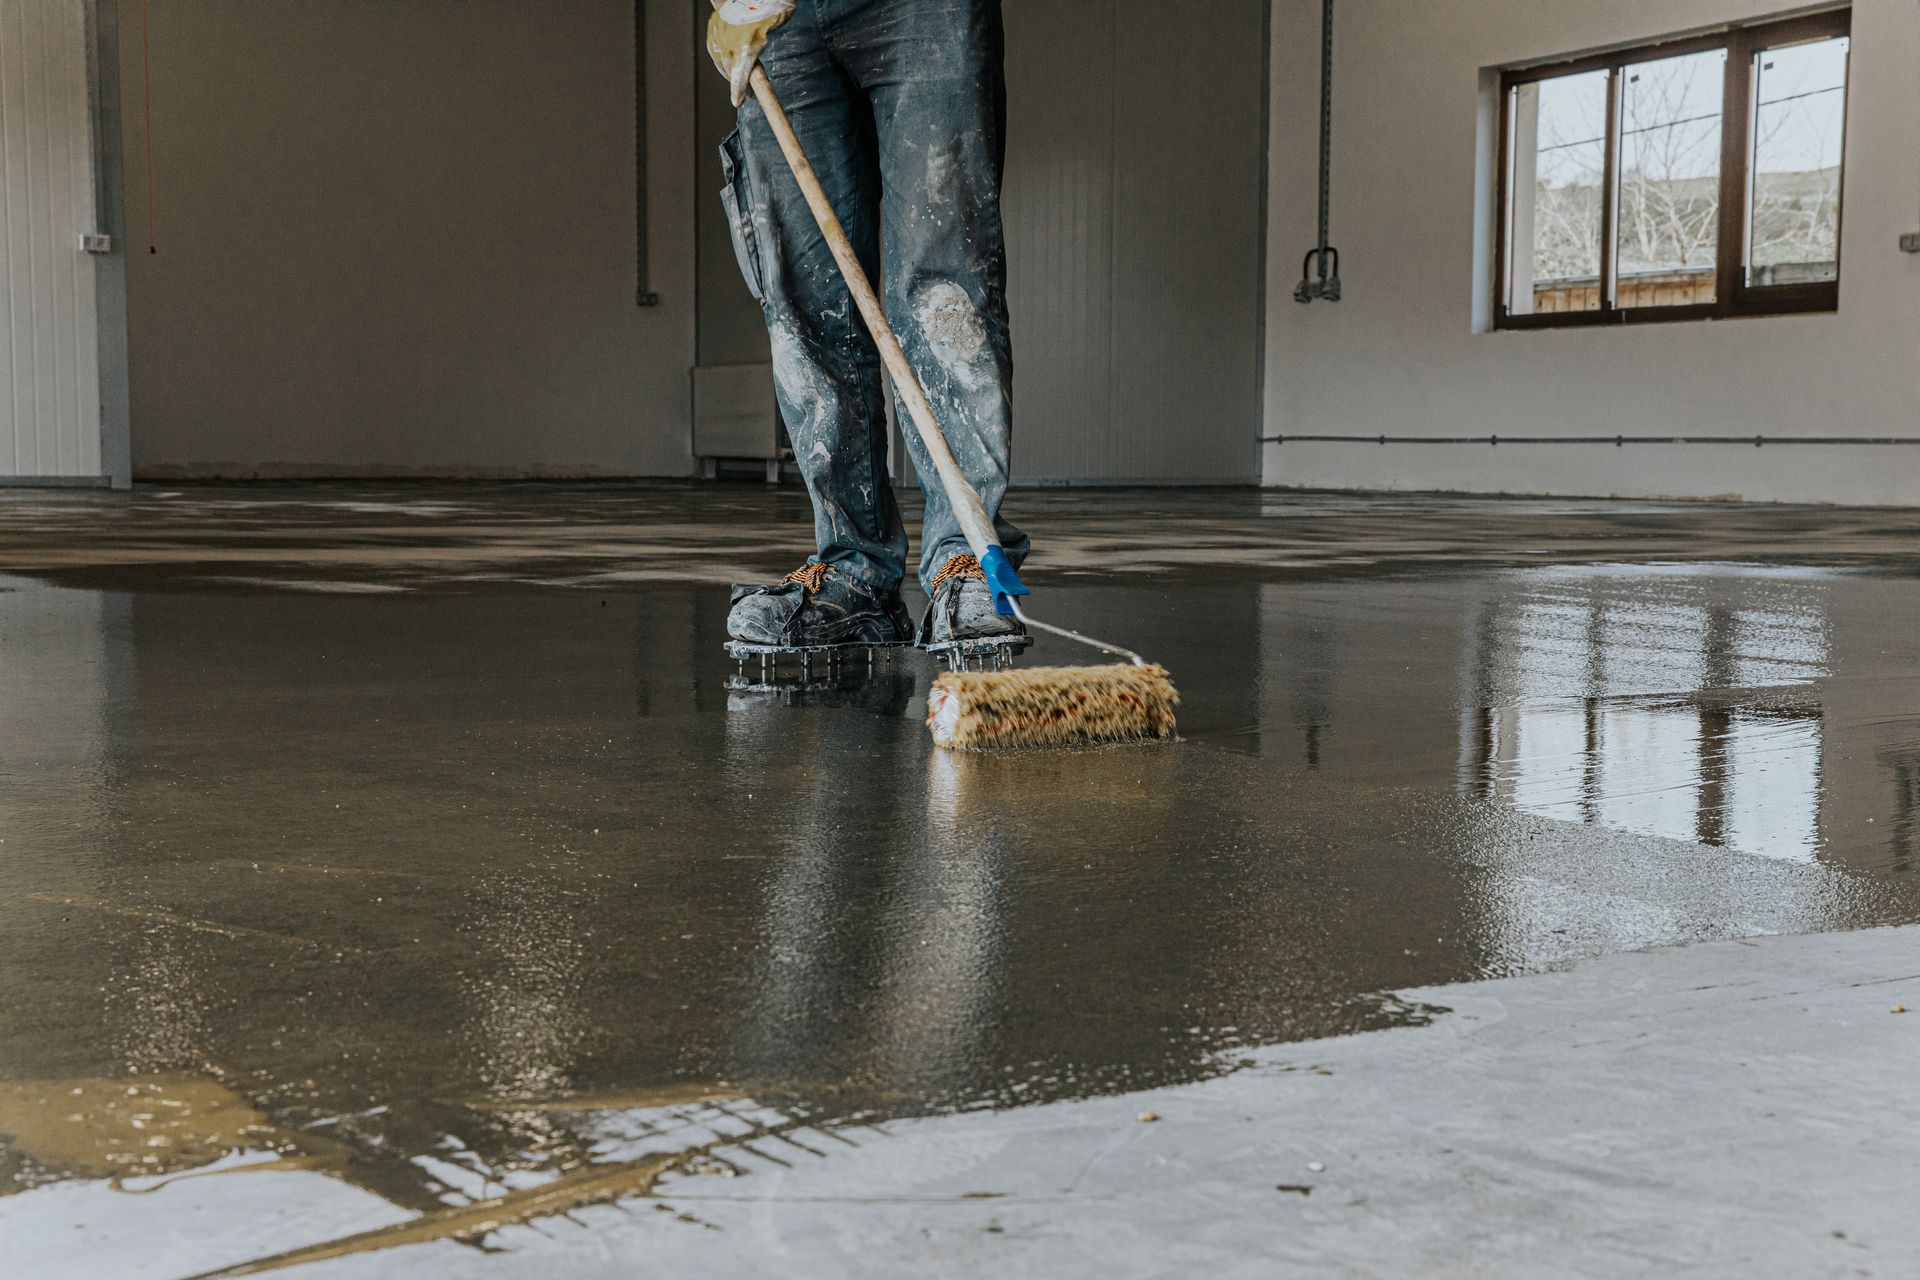 A man is cleaning a concrete floor with a broom.